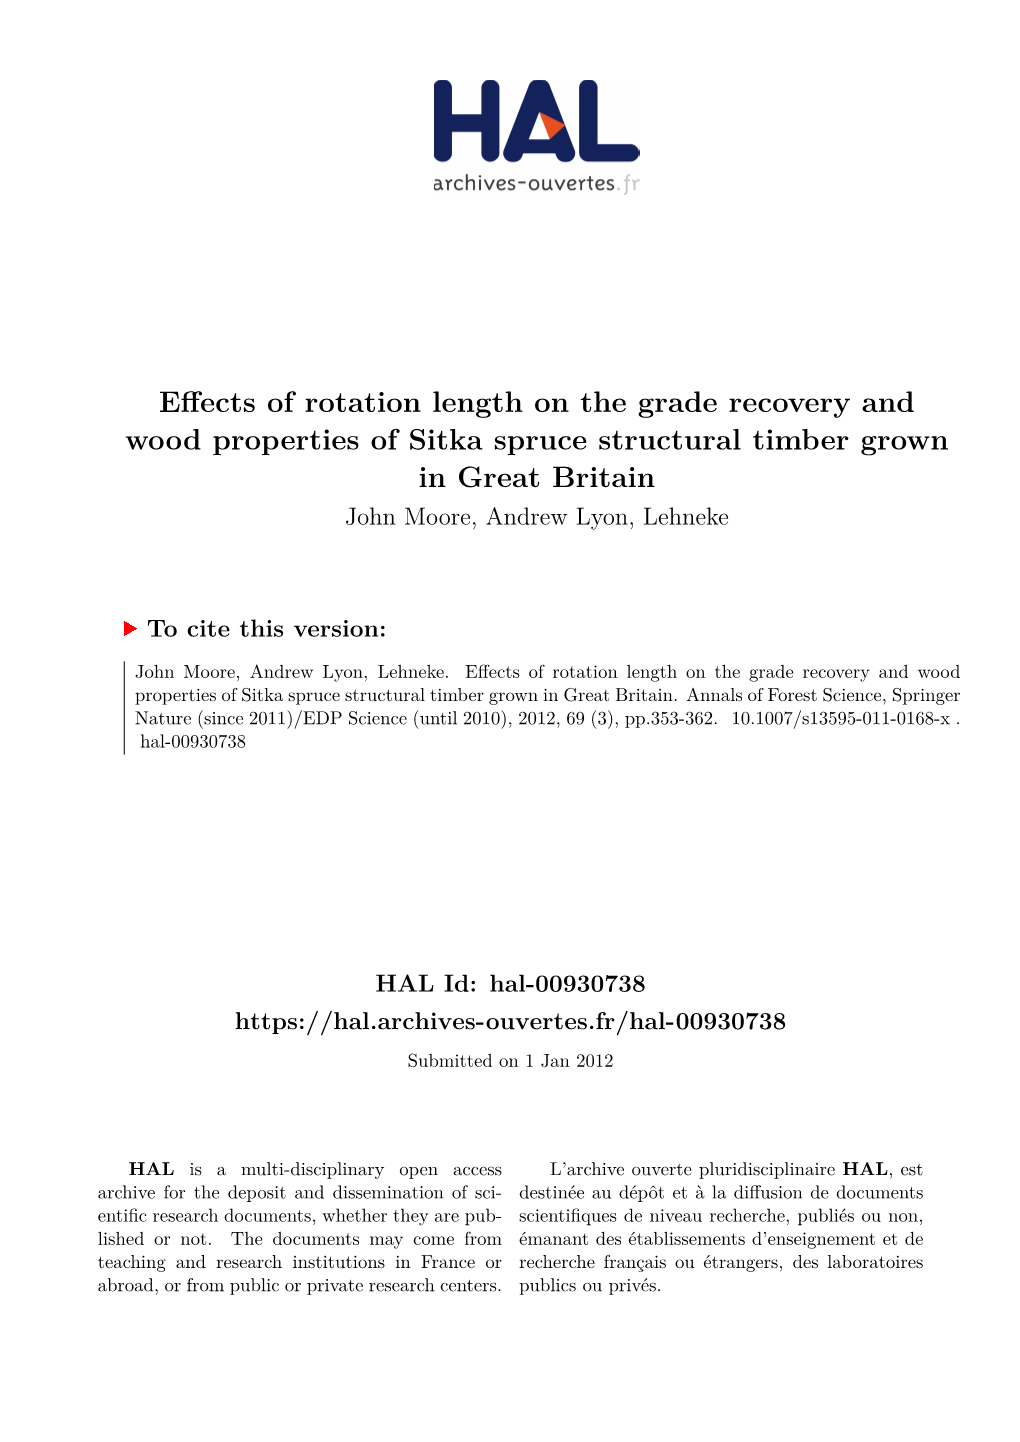 Effects of Rotation Length on the Grade Recovery and Wood Properties of Sitka Spruce Structural Timber Grown in Great Britain John Moore, Andrew Lyon, Lehneke